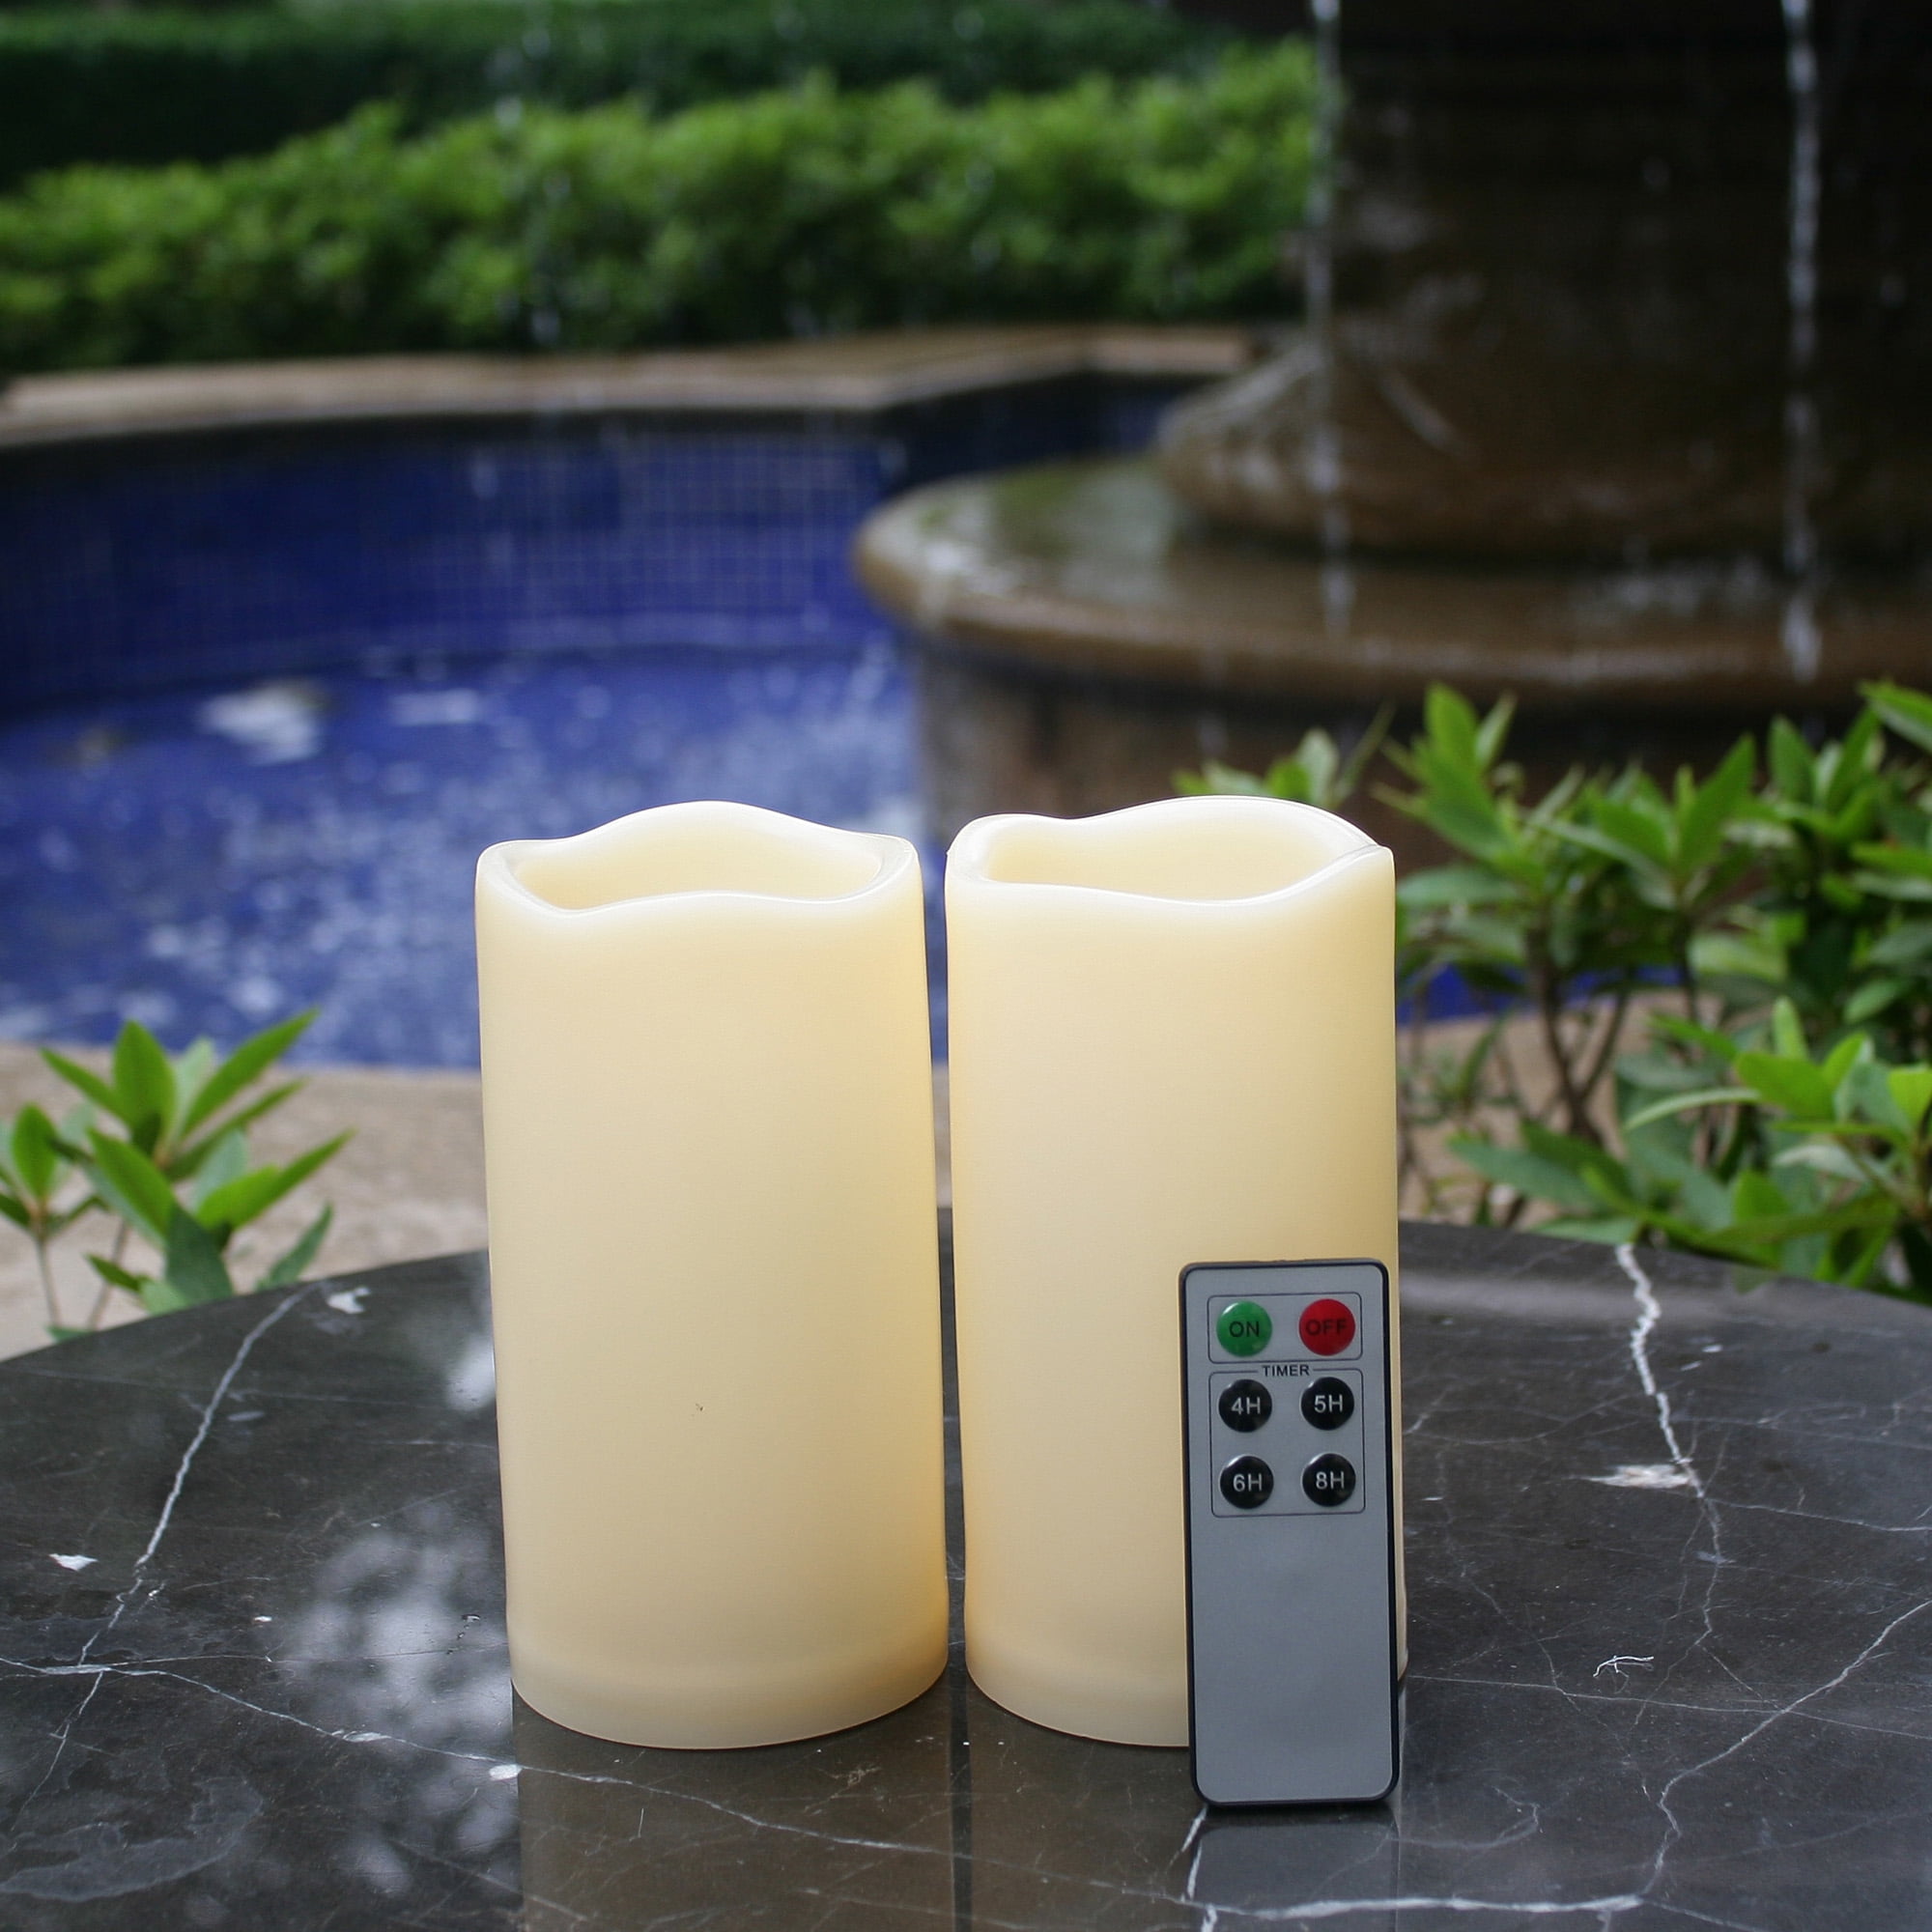 3 Waterproof Outdoor Battery Operated Flameless LED Pillar Candle with Timer Flickering Plastic Resin Electric Decorative Light for Lantern Patio Garden Home Decor Party Wedding Decorations 3x4 Inches 